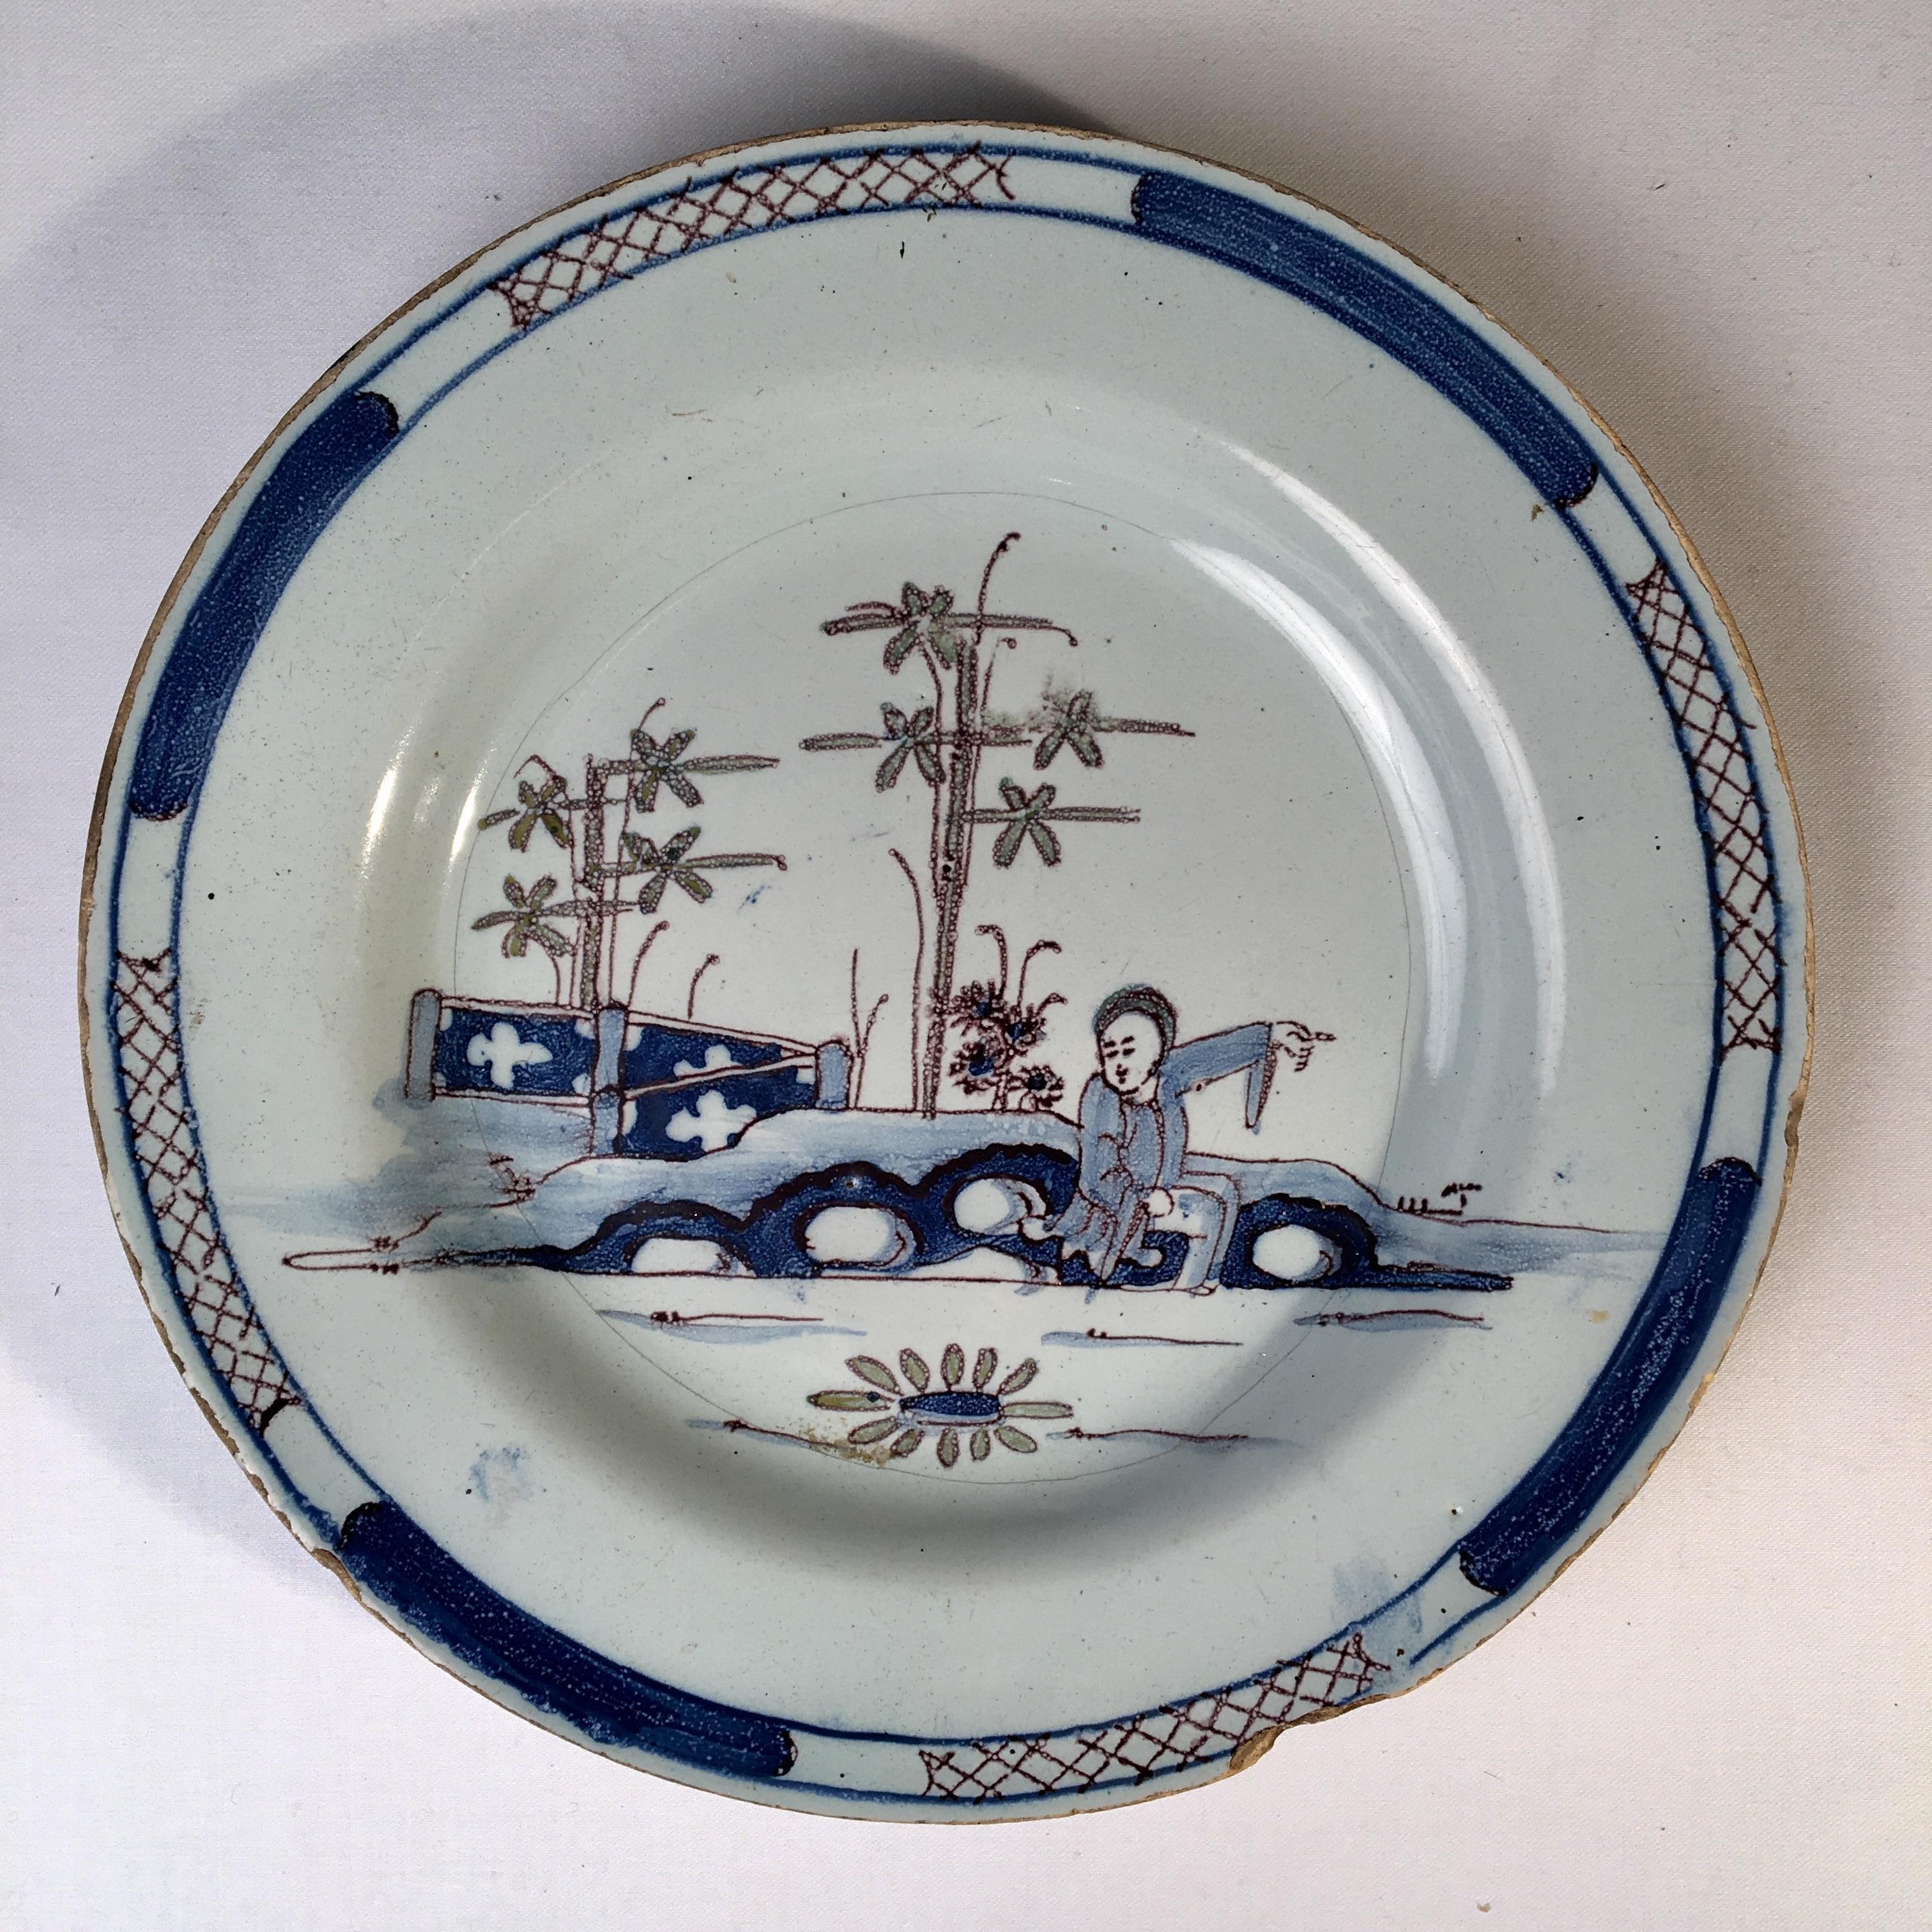 A Chinese-style delft plate, in blue and white glaze depicting a figure near a bridge, late 18th century.